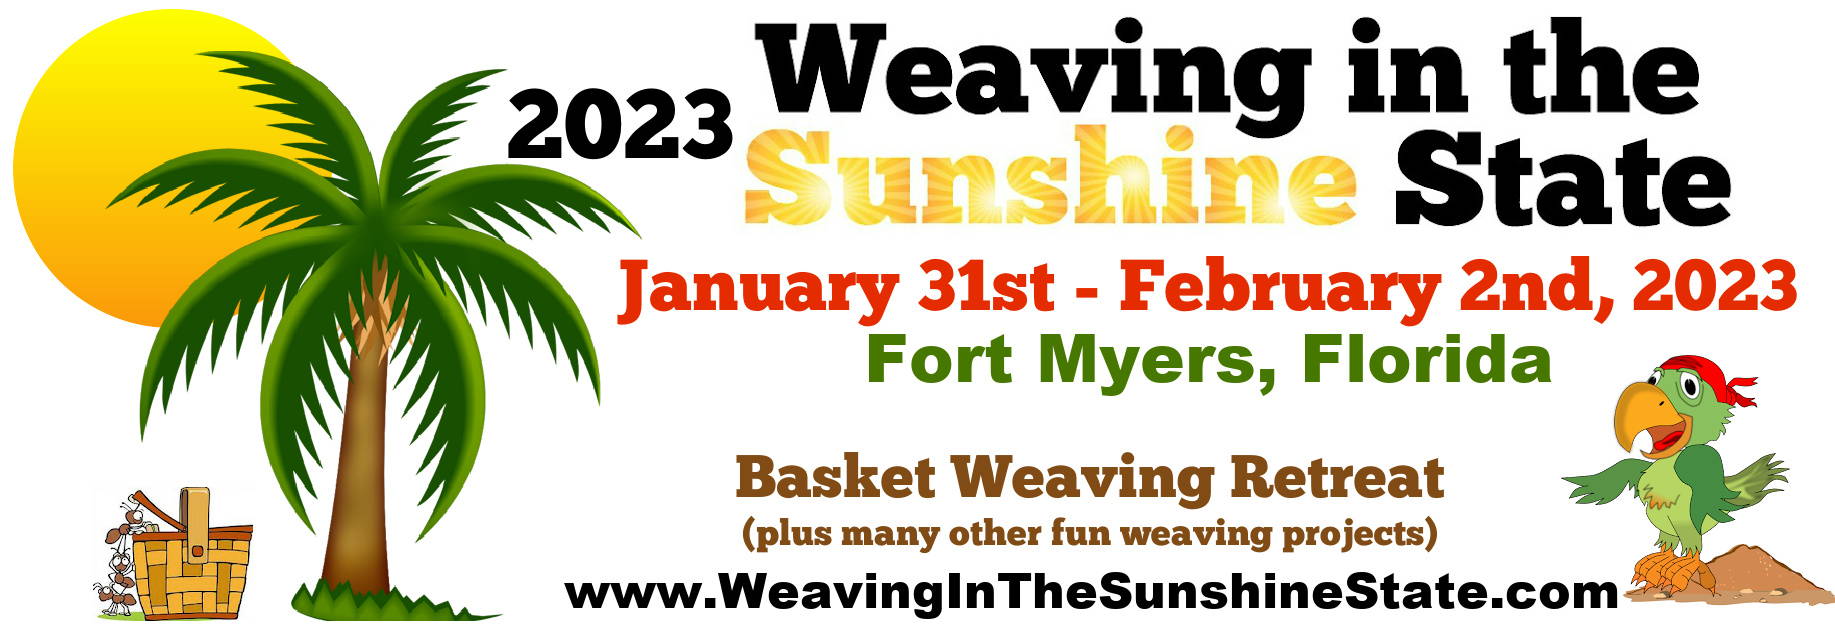 2023 Weaving in the Sunshine State